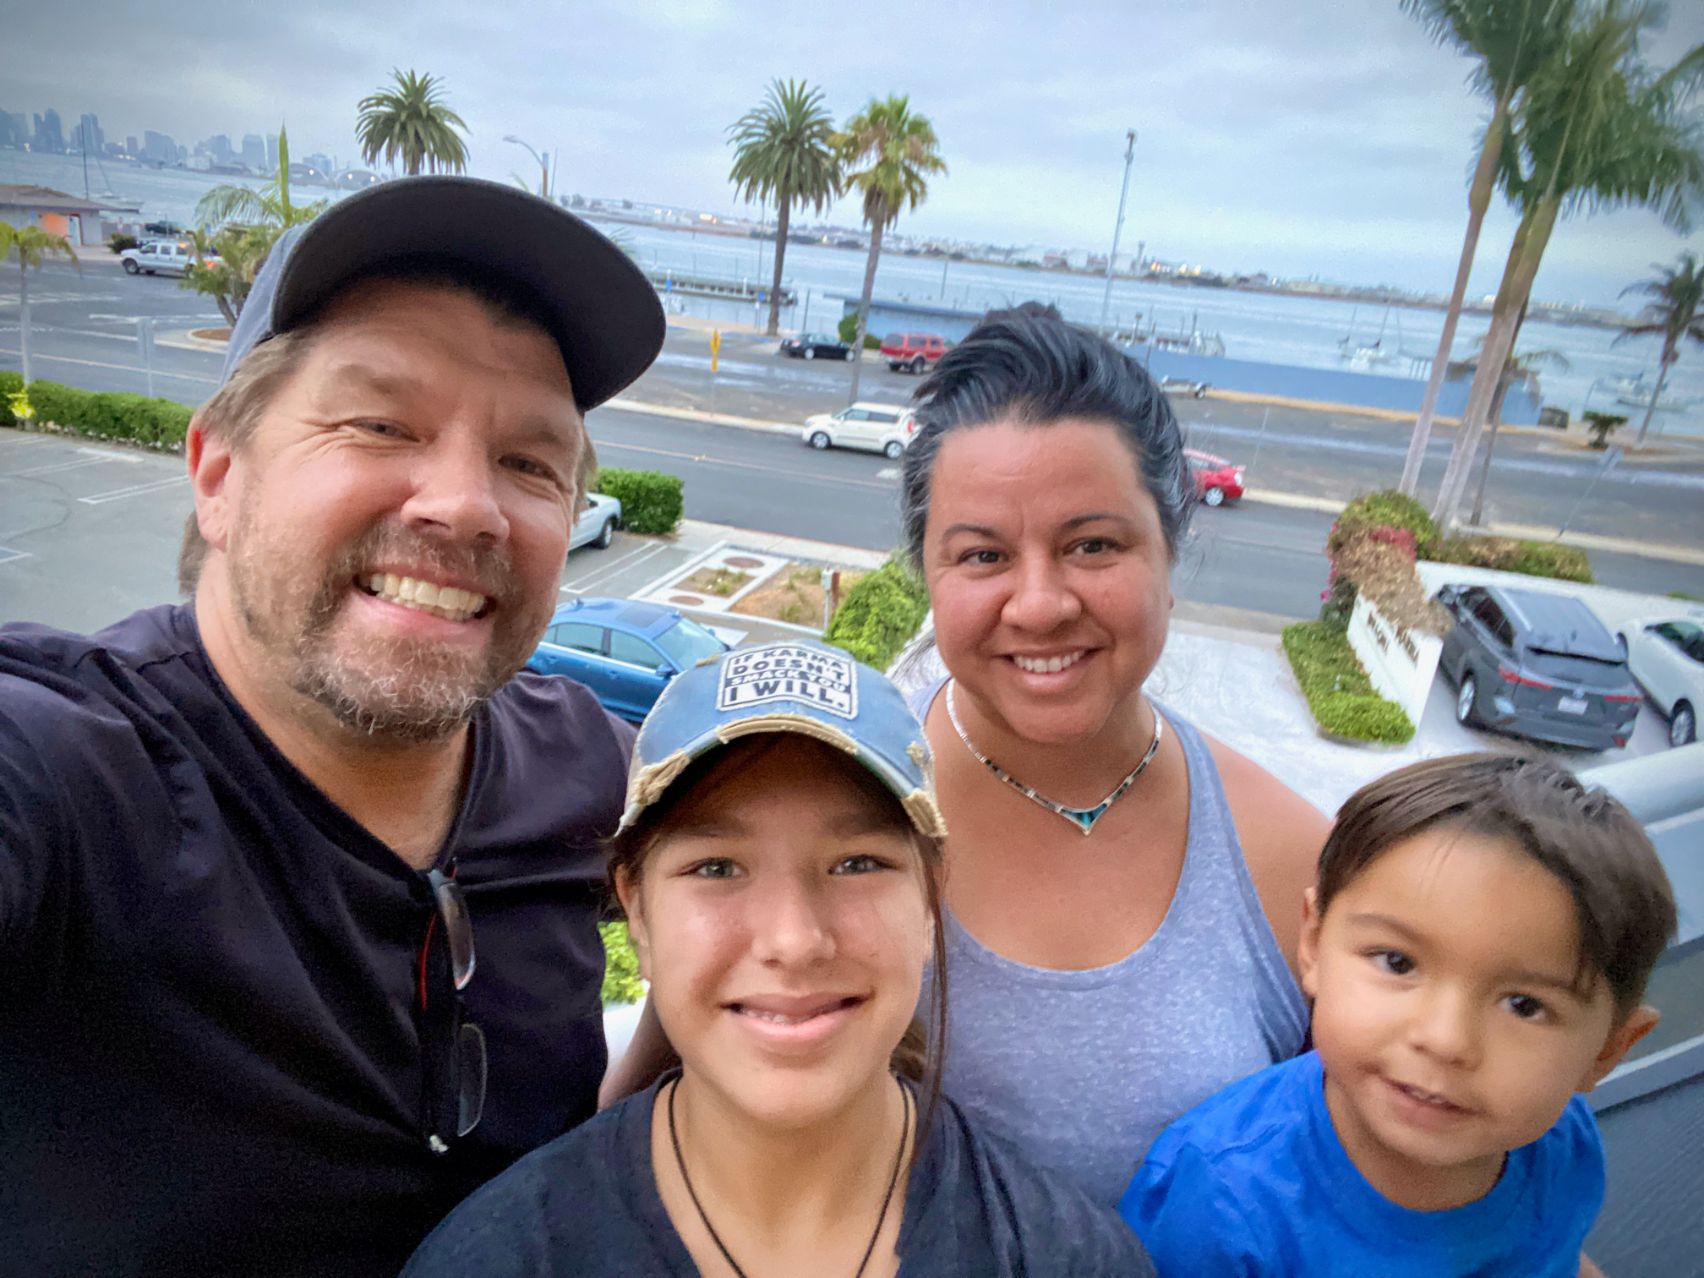 A family of four poses in a selfie photo. Father, Will Herrington, holds the camera and smiles with his wife and two children. There is a beach scenery off in the distant background.